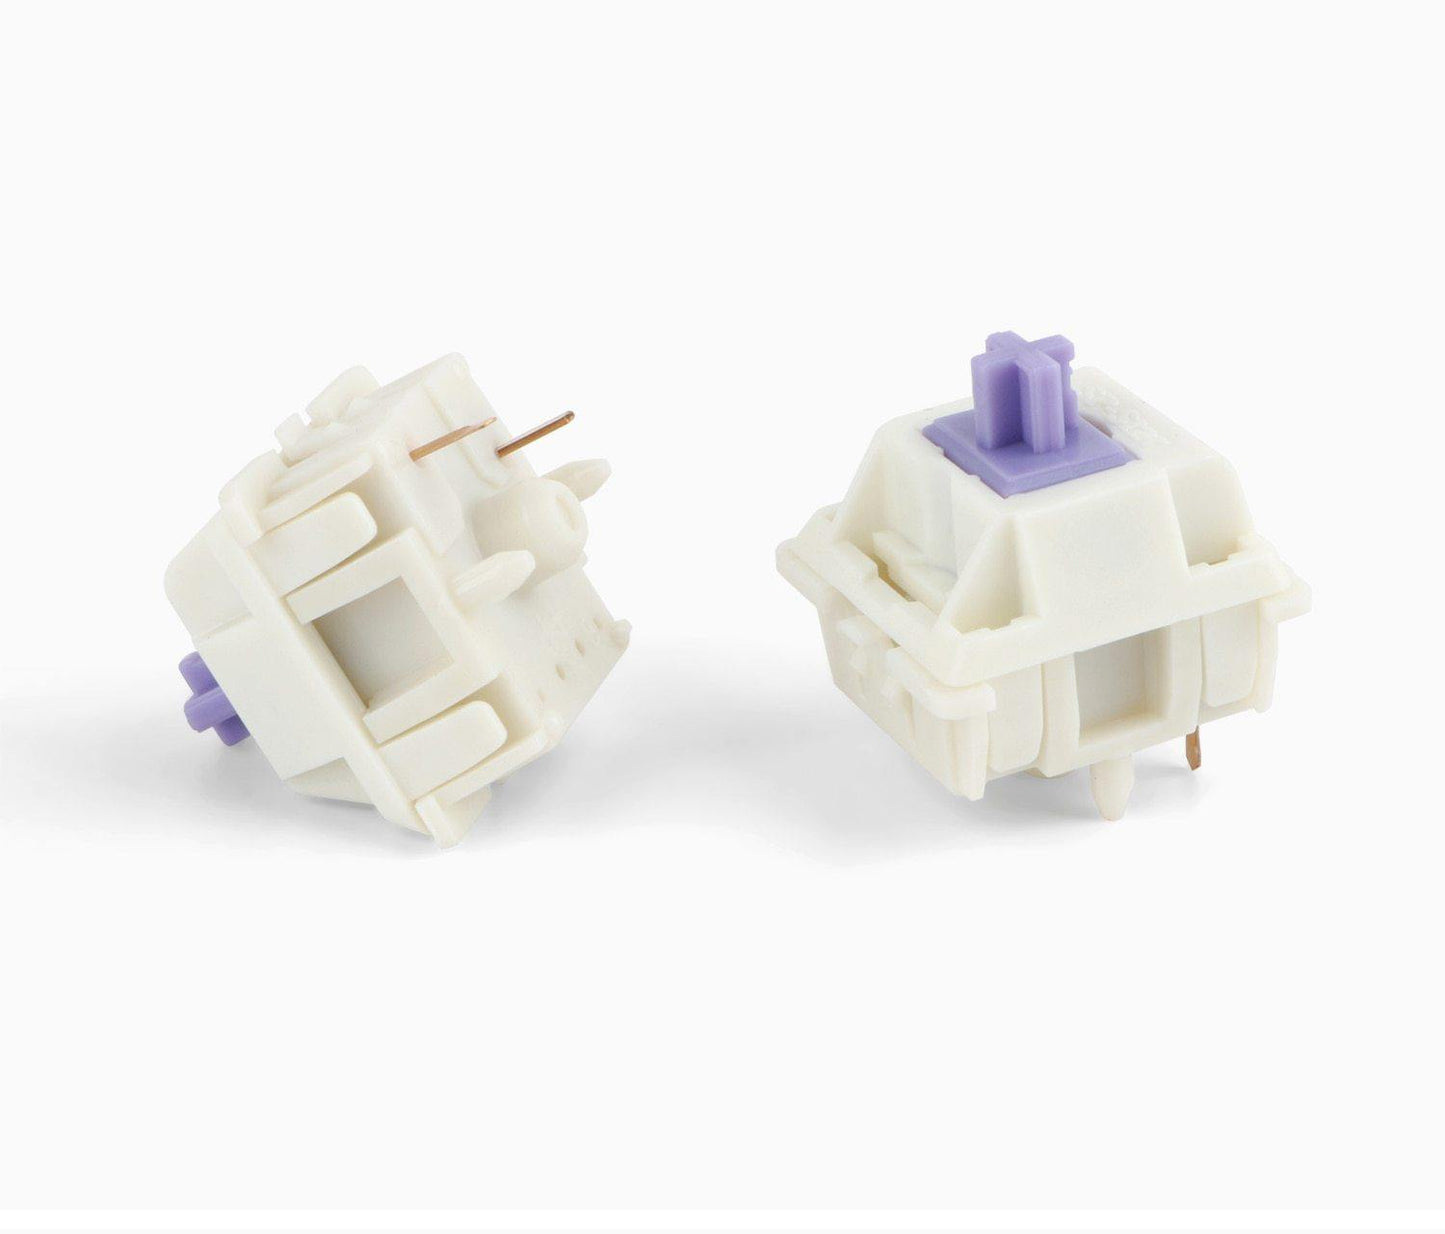 SP-STAR POLE STARS PURPLE TACTILE SWITCHES - THE KEYCAP CLUB